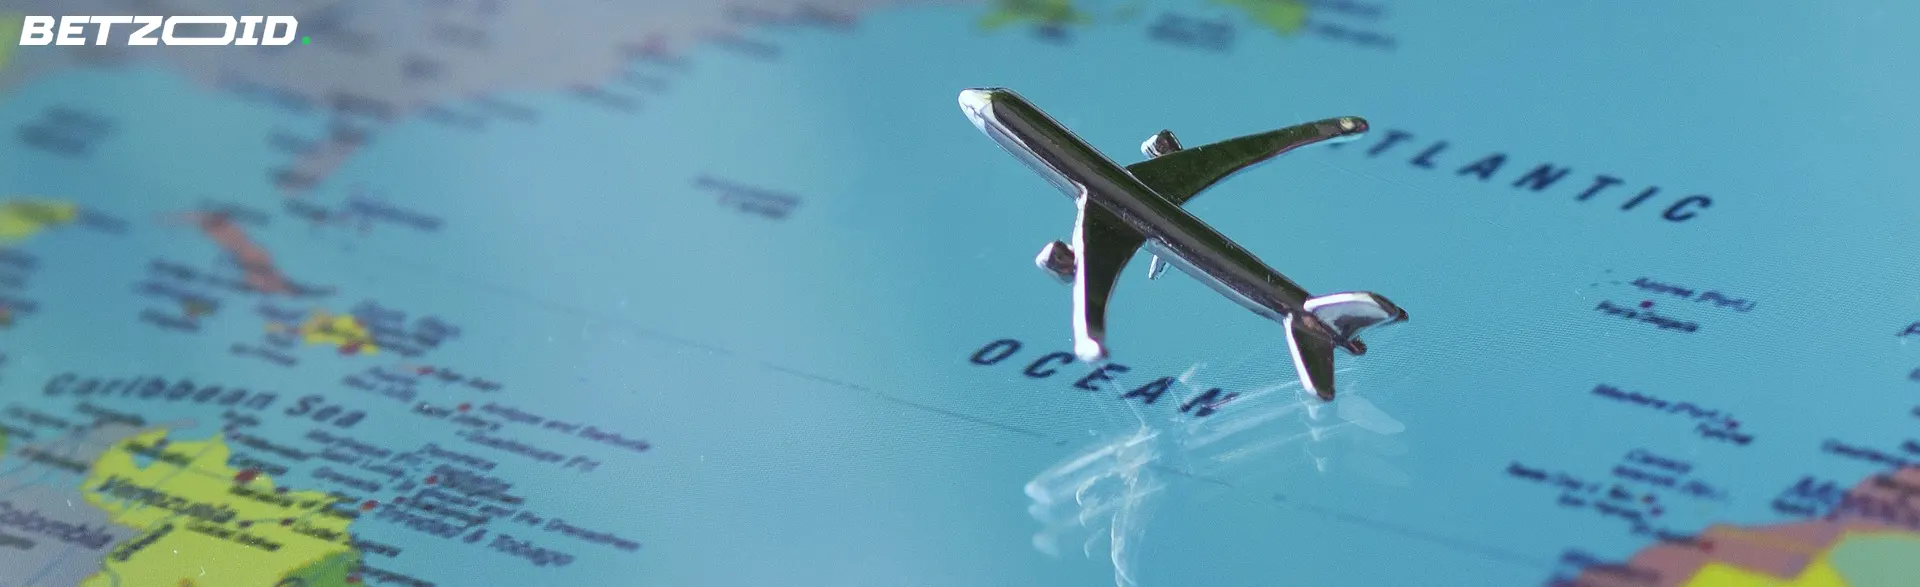 A toy airplane on a world map focused on the Atlantic Ocean, representing international sports betting sites available in Canada.